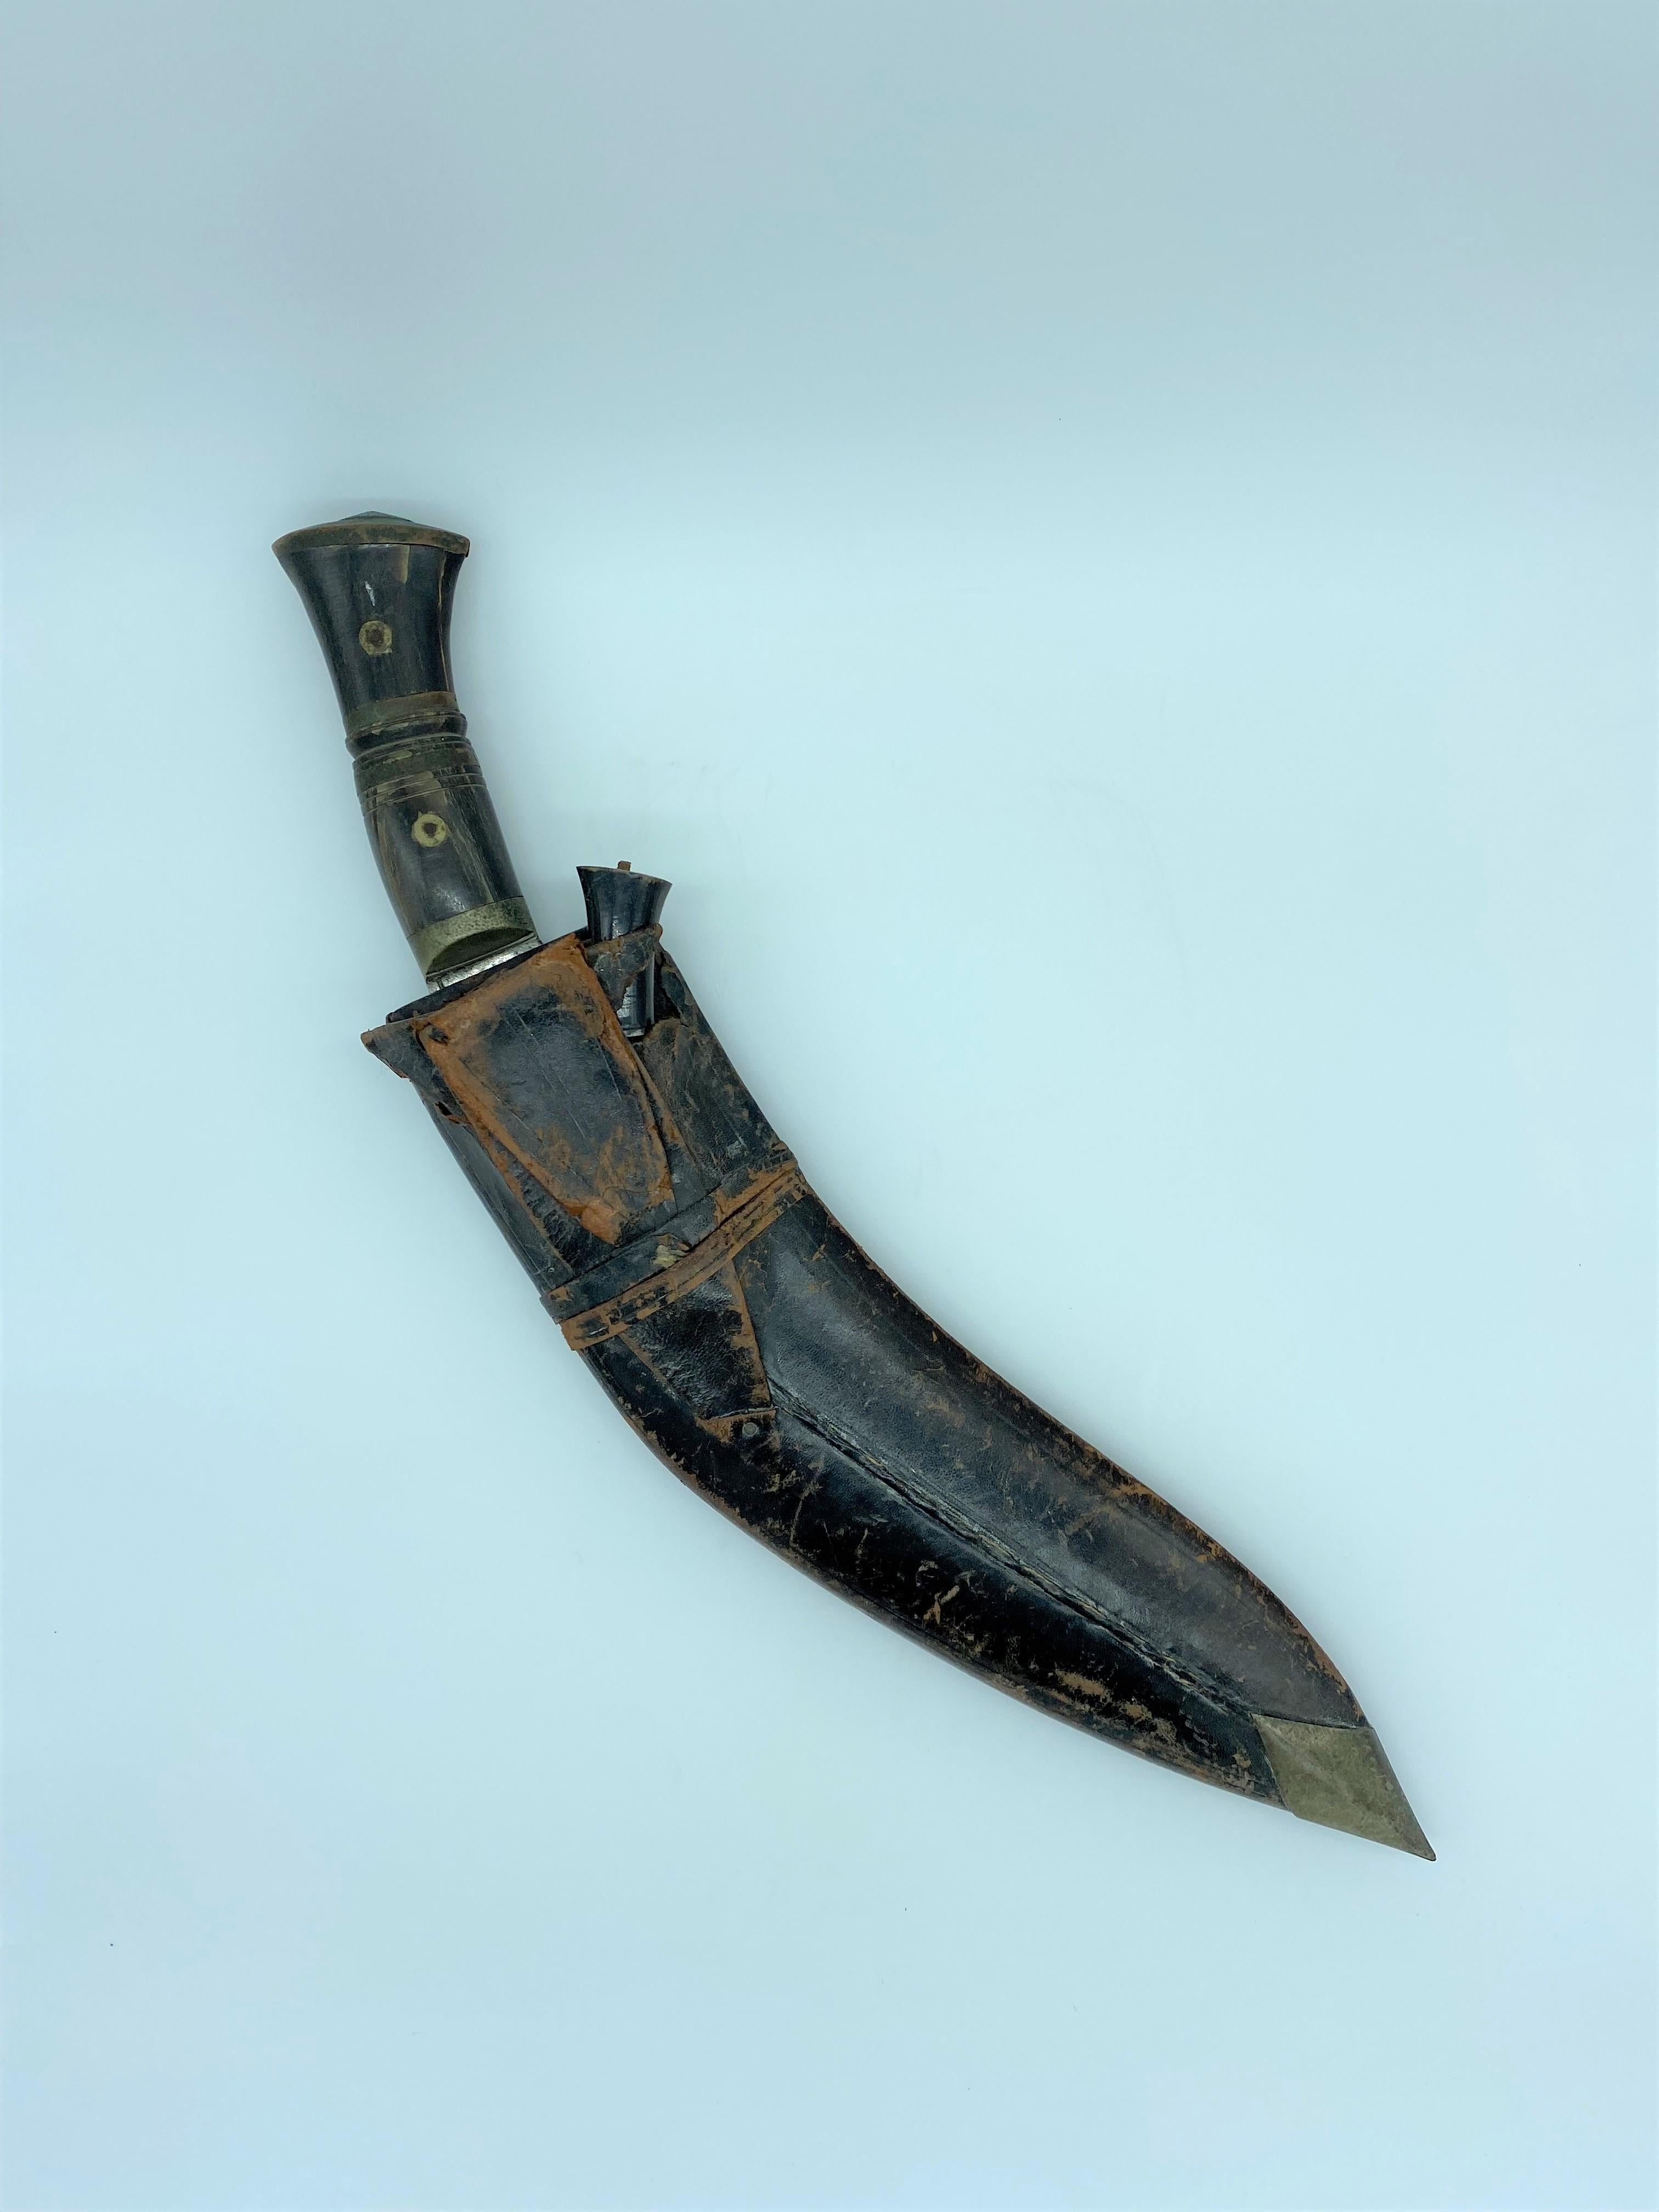 Khukuri knife from Nepal, early 20th century. 
Its blade is heavy and curved, made of forged metal. The handle is made from horn and copper. With it is attached a smaller Khukuri (measuring 1.9 inch x 4.3 inch).

The Khukuri is a Nepalese knife